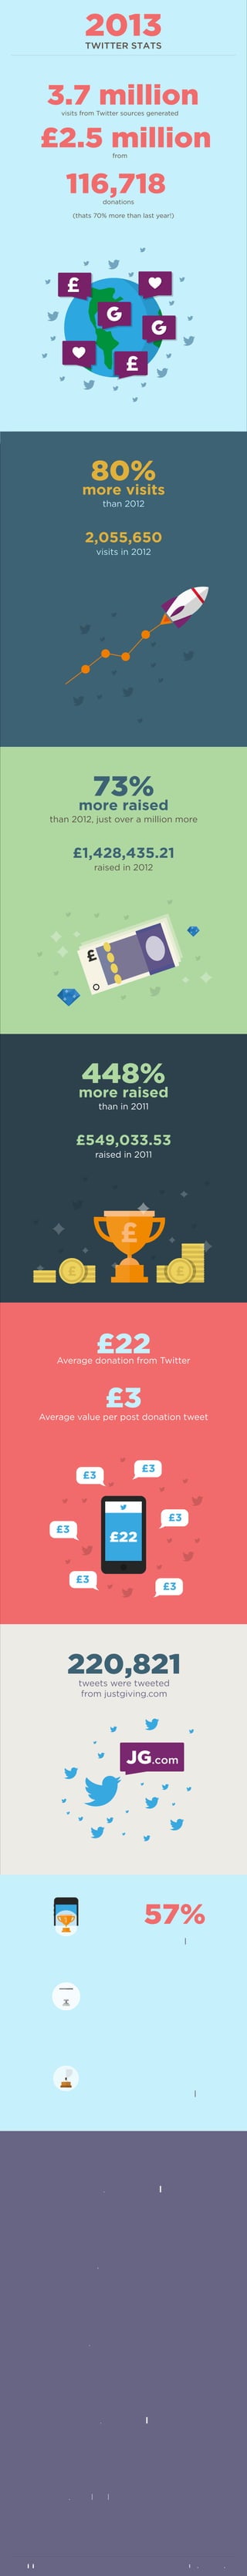 2013
TWITTER STATS

3.7 million
visits from Twitter sources generated

£2.5 million
from

116,718
donations

(thats 70% more than last year!)

80%

more visits
than 2012

2,055,650
visits in 2012

73%

more raised

than 2012, just over a million more

£1,428,435.21
raised in 2012

448%

more raised
than in 2011

£549,033.53
raised in 2011

£22

Average donation from Twitter

£3

Average value per post donation tweet

£3

£3

£3

£3

£3

£3

220,821
tweets were tweeted
from justgiving.com

57%

of visits from Twitter
are from mobile devices

31%

are from desktop

12%

are from tablets

Top 5 pages with most visits from Twitter
justgiving.com/jessandlee

80k
visits

£12,291
raised

justgiving.com/stuartrose89

29k
visits

£16,295
raised

justgiving.com/theandrebrothers

29k
visits

£7,685
raised

justgiving.com/huddlefro

27k
visits

£50,639
raised

justgiving.com/local/project/savekettering

25k
visits

£19,433
raised

blog.justgiving.com

 